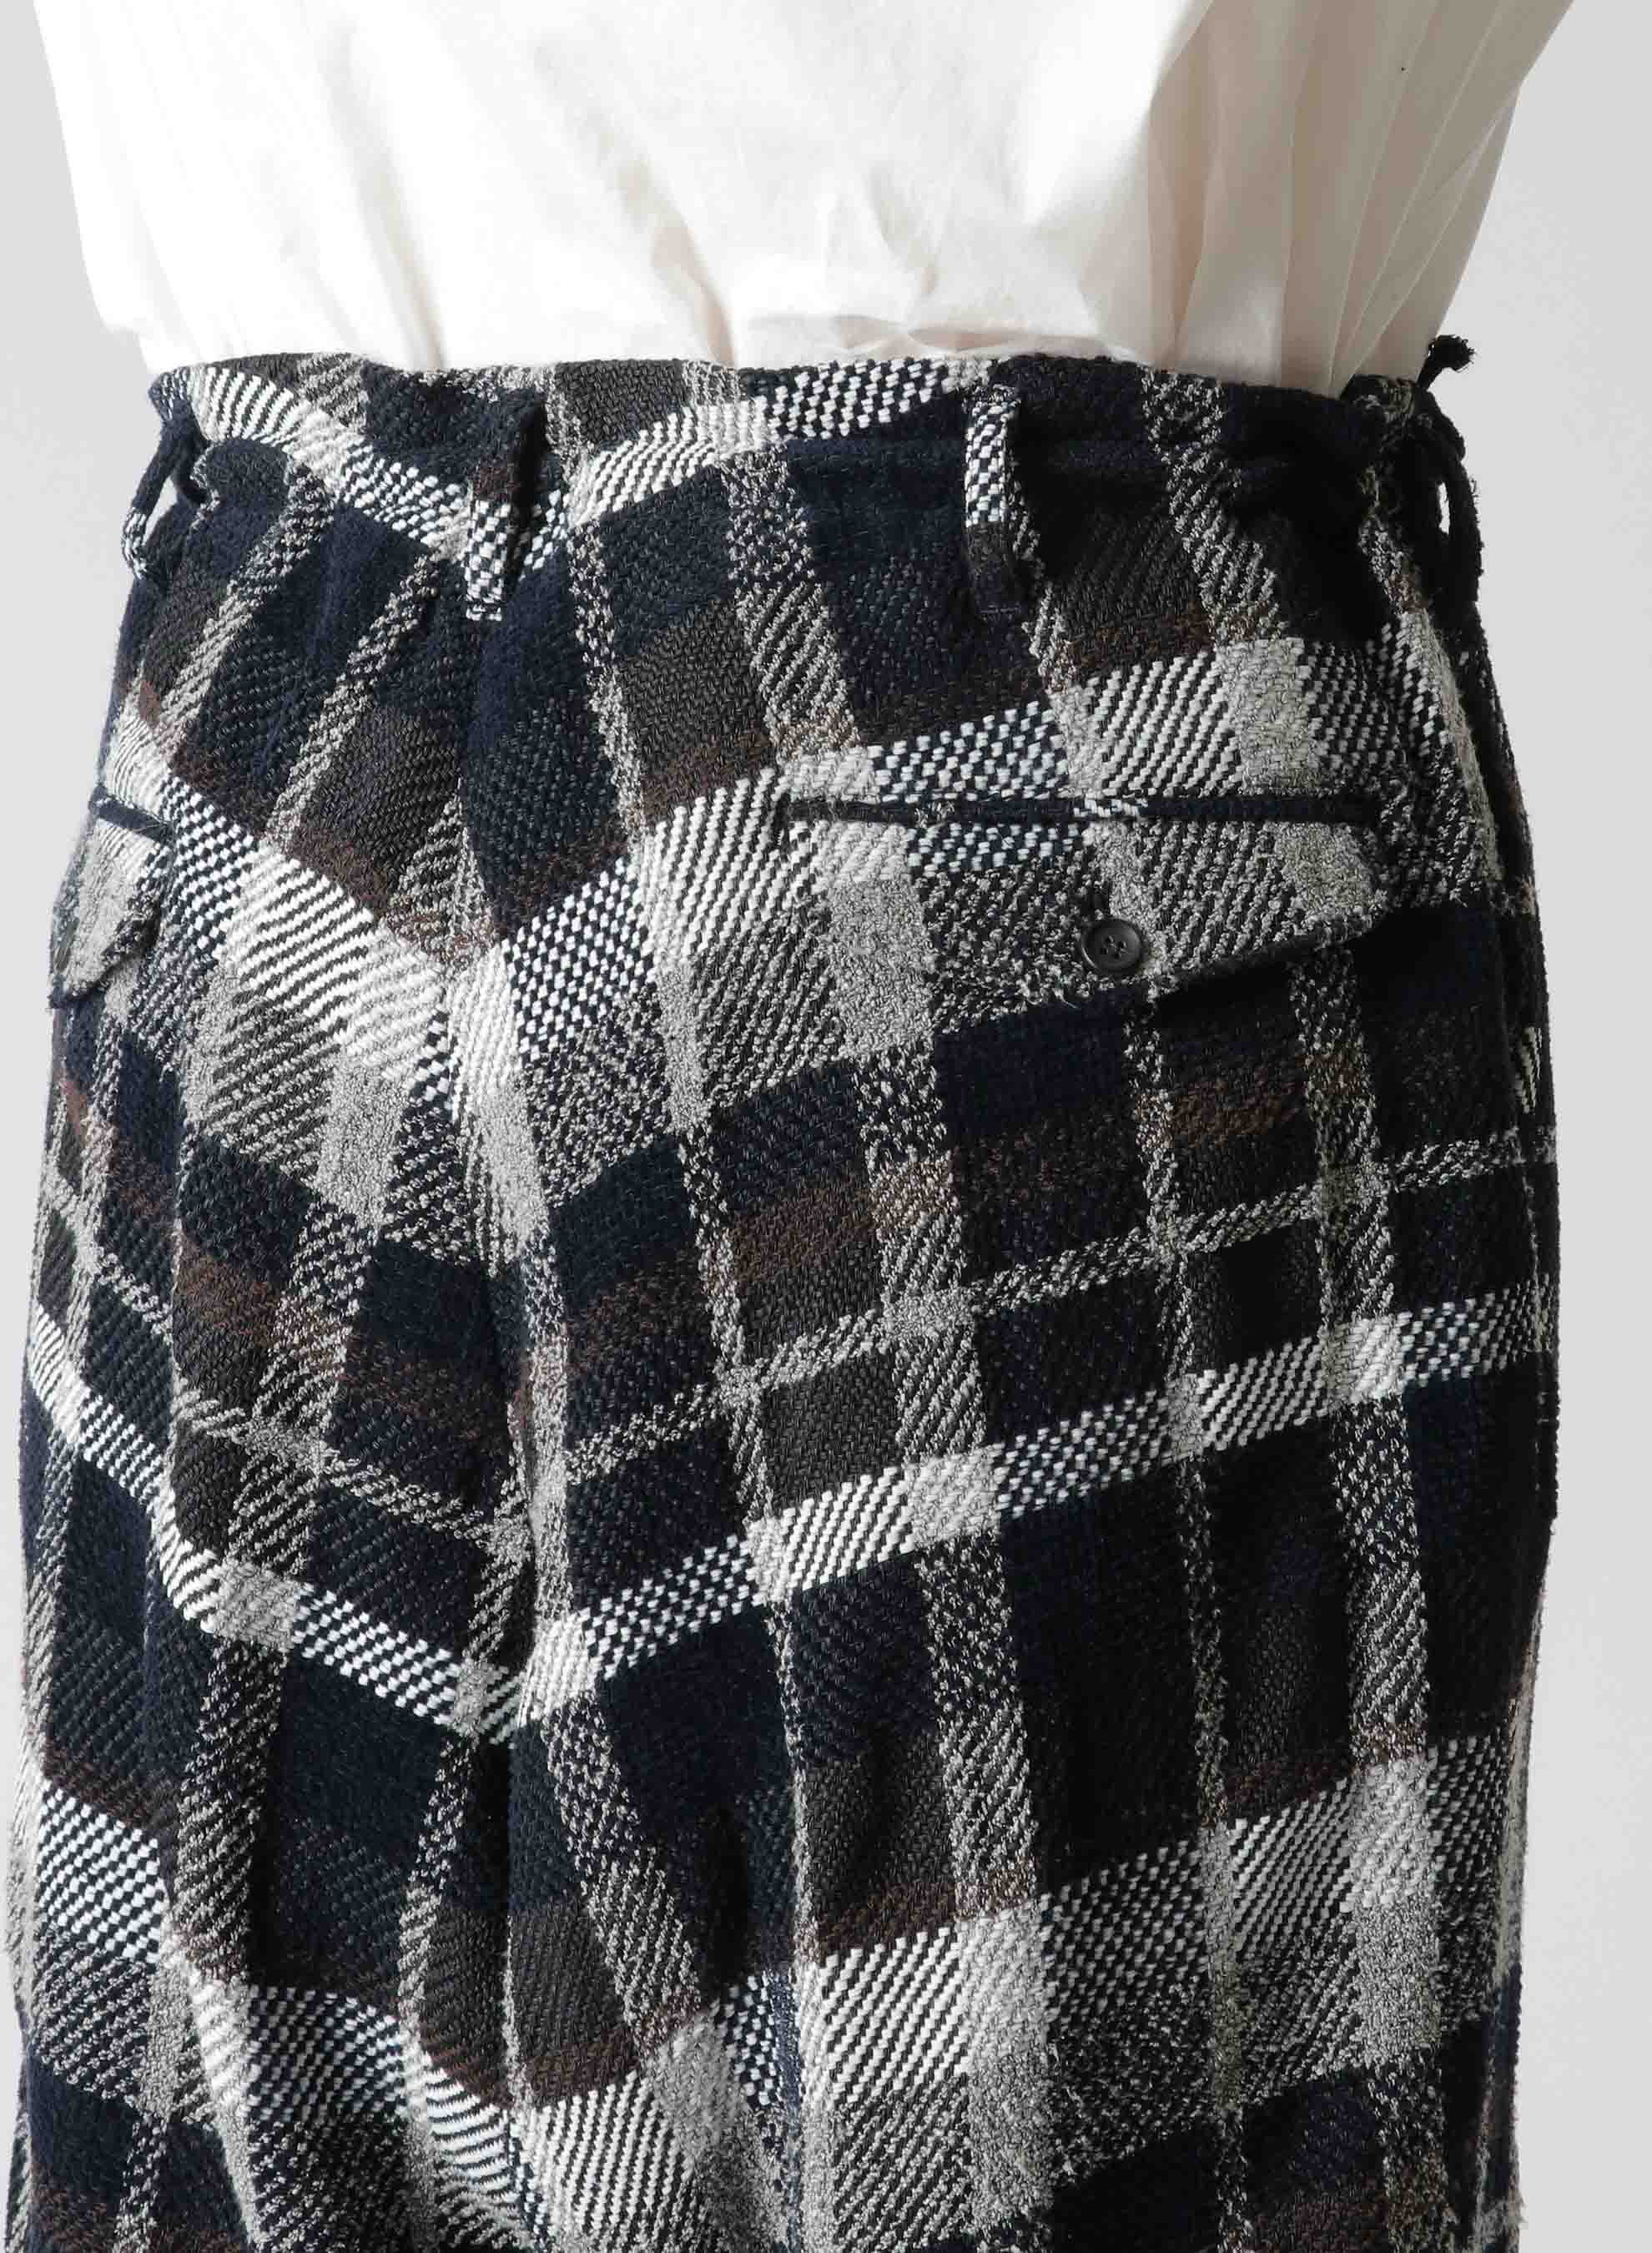 COTTON/PAPER CHECK TWEED PLAID SIDE STRING PANTS